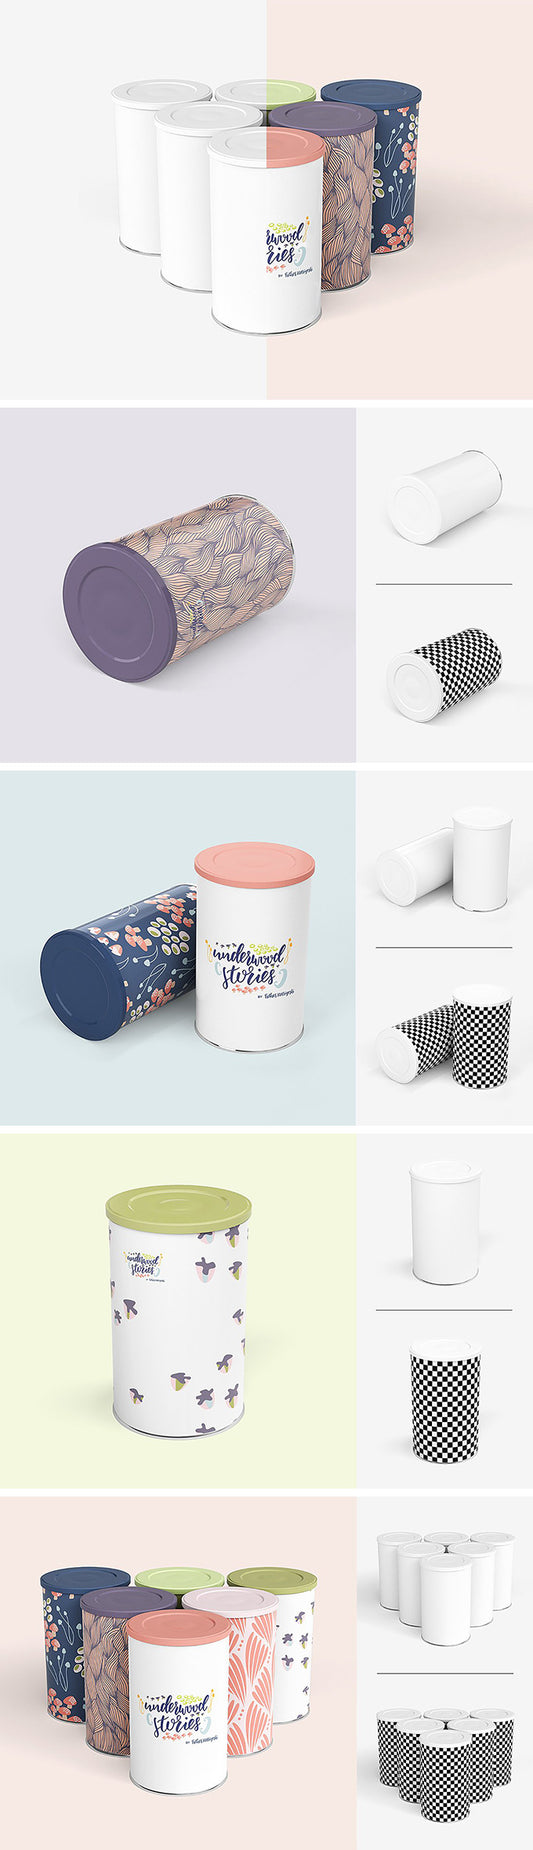 Free Tin Canister Mockup Set of Clean Designs